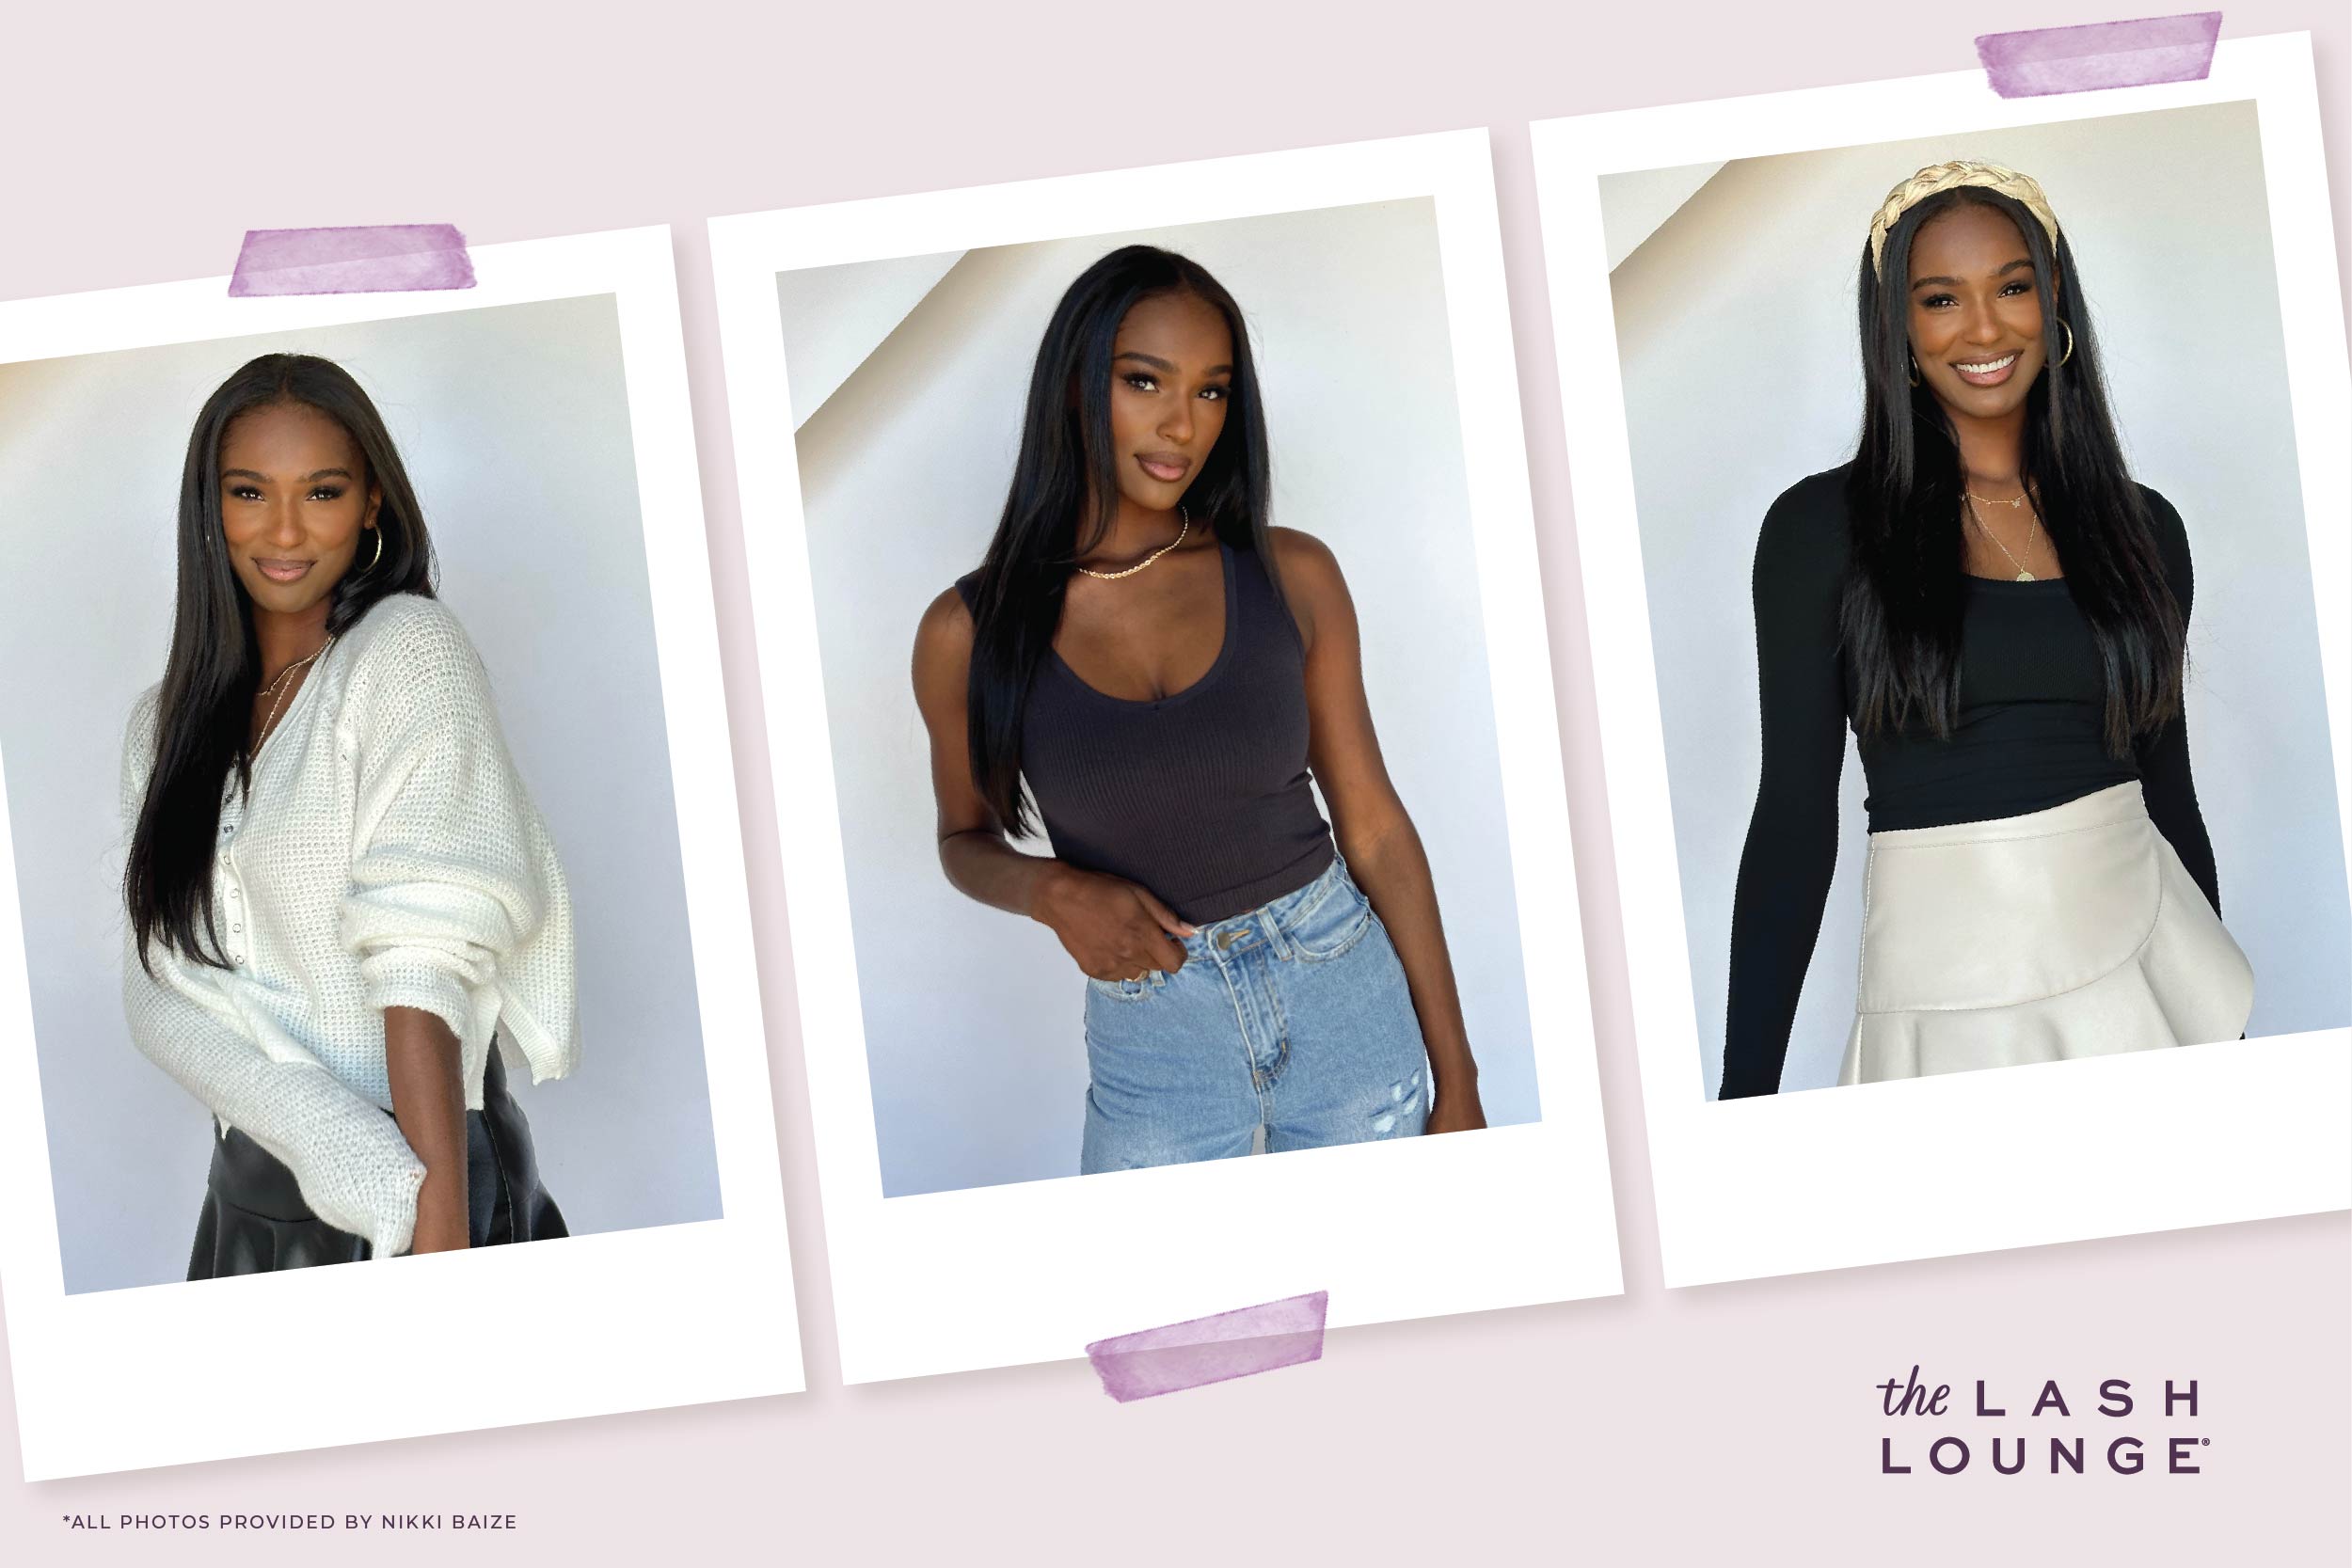 Lifestyle influencer and Lash Lounge guest, Nikki Baize, posing in 3 different images placed in a polaroid frame.